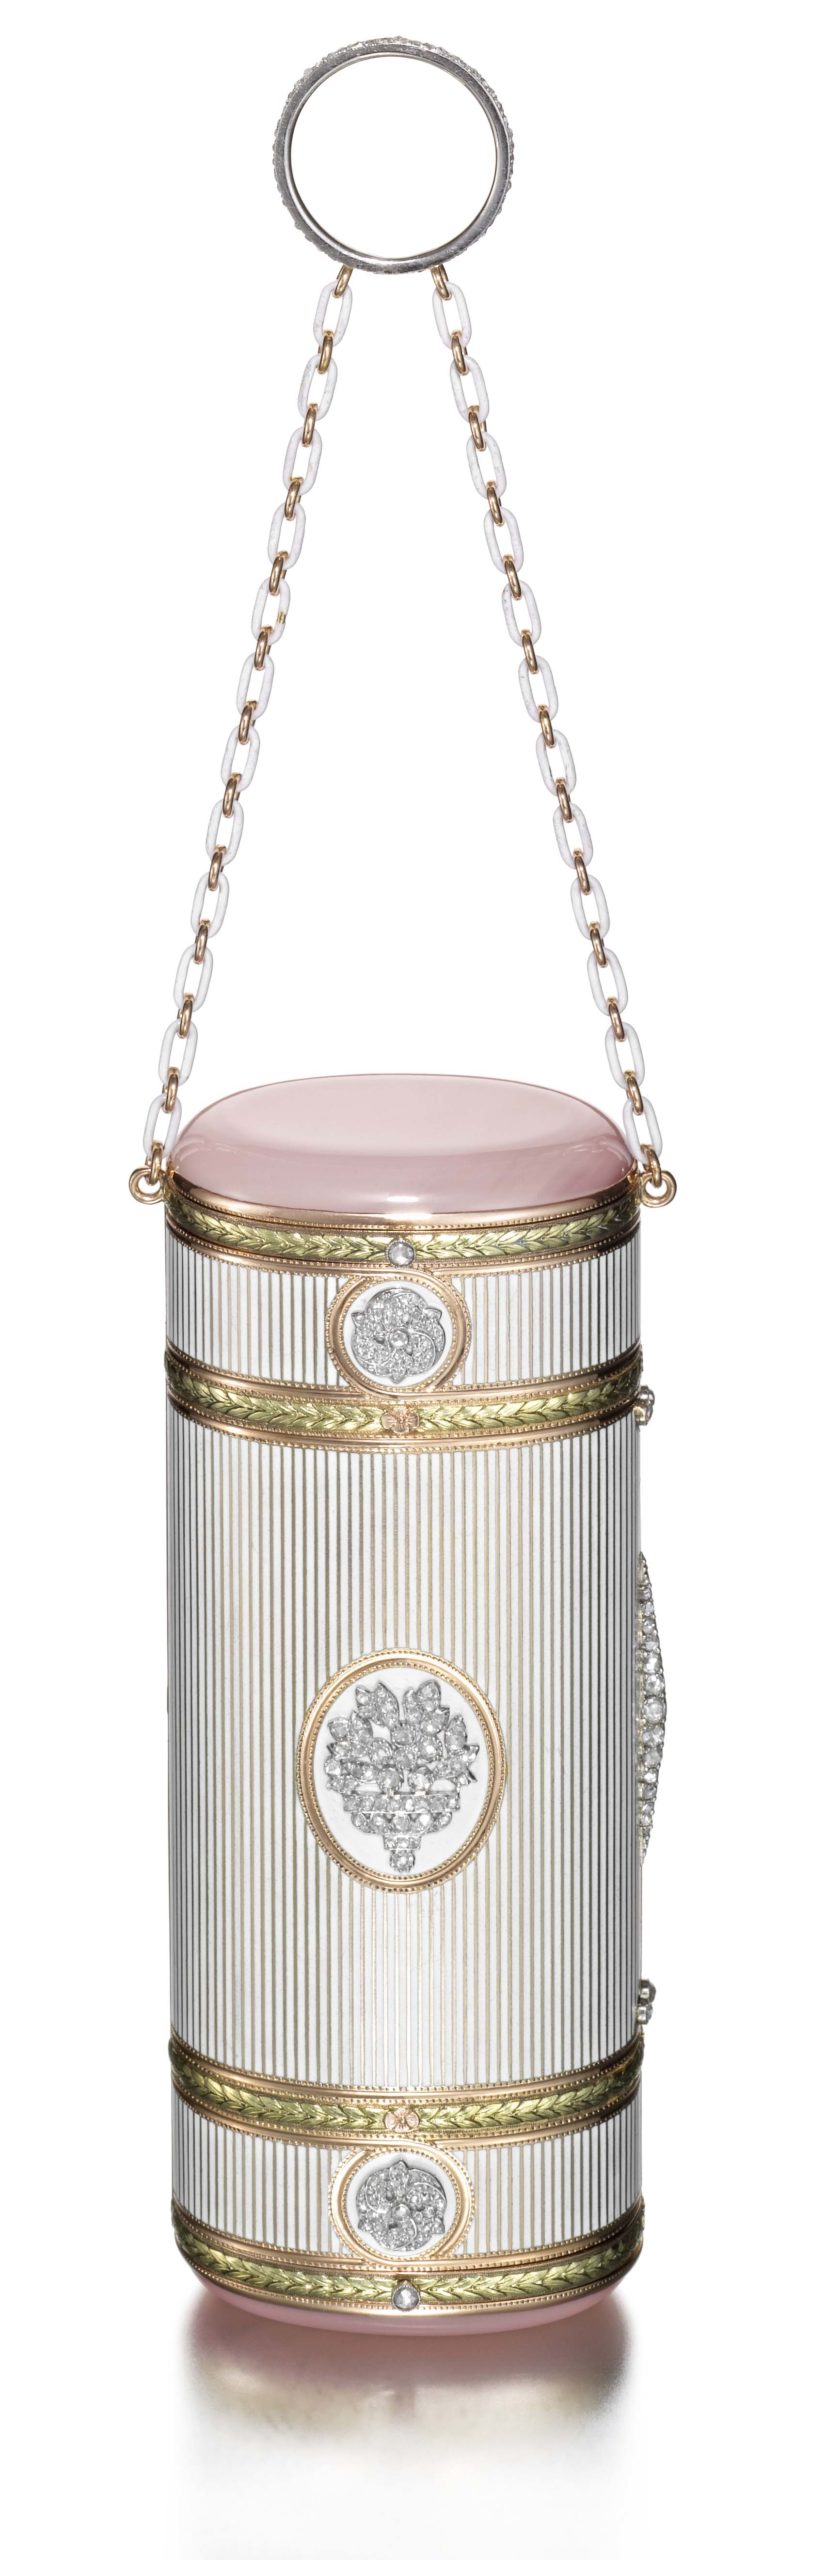 Cartier, Paris, circa 1913 Cylindrical Vanity and Cigarette Case,